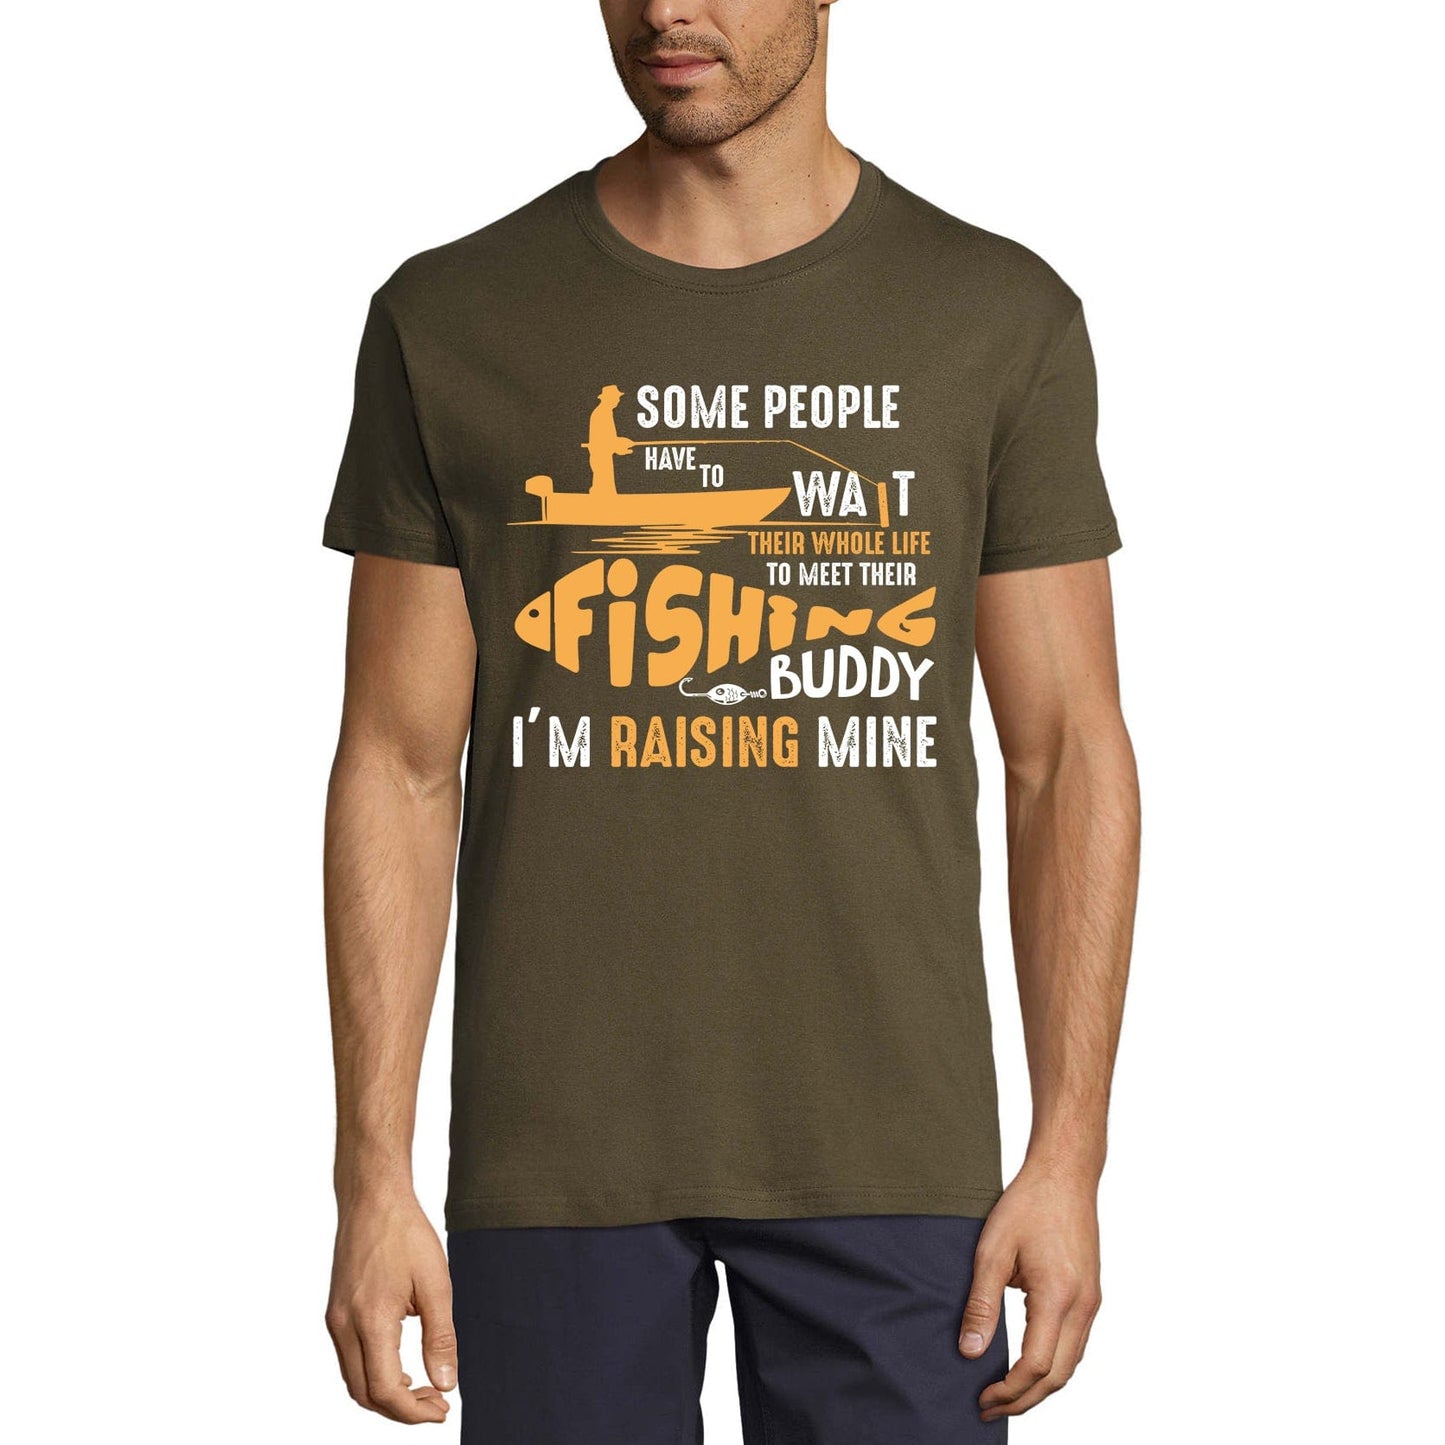 ULTRABASIC Men's T-Shirt Some People Have to Wait Their Whole Life to Meet Fishing Buddy - Funny Fisherman Tee Shirt